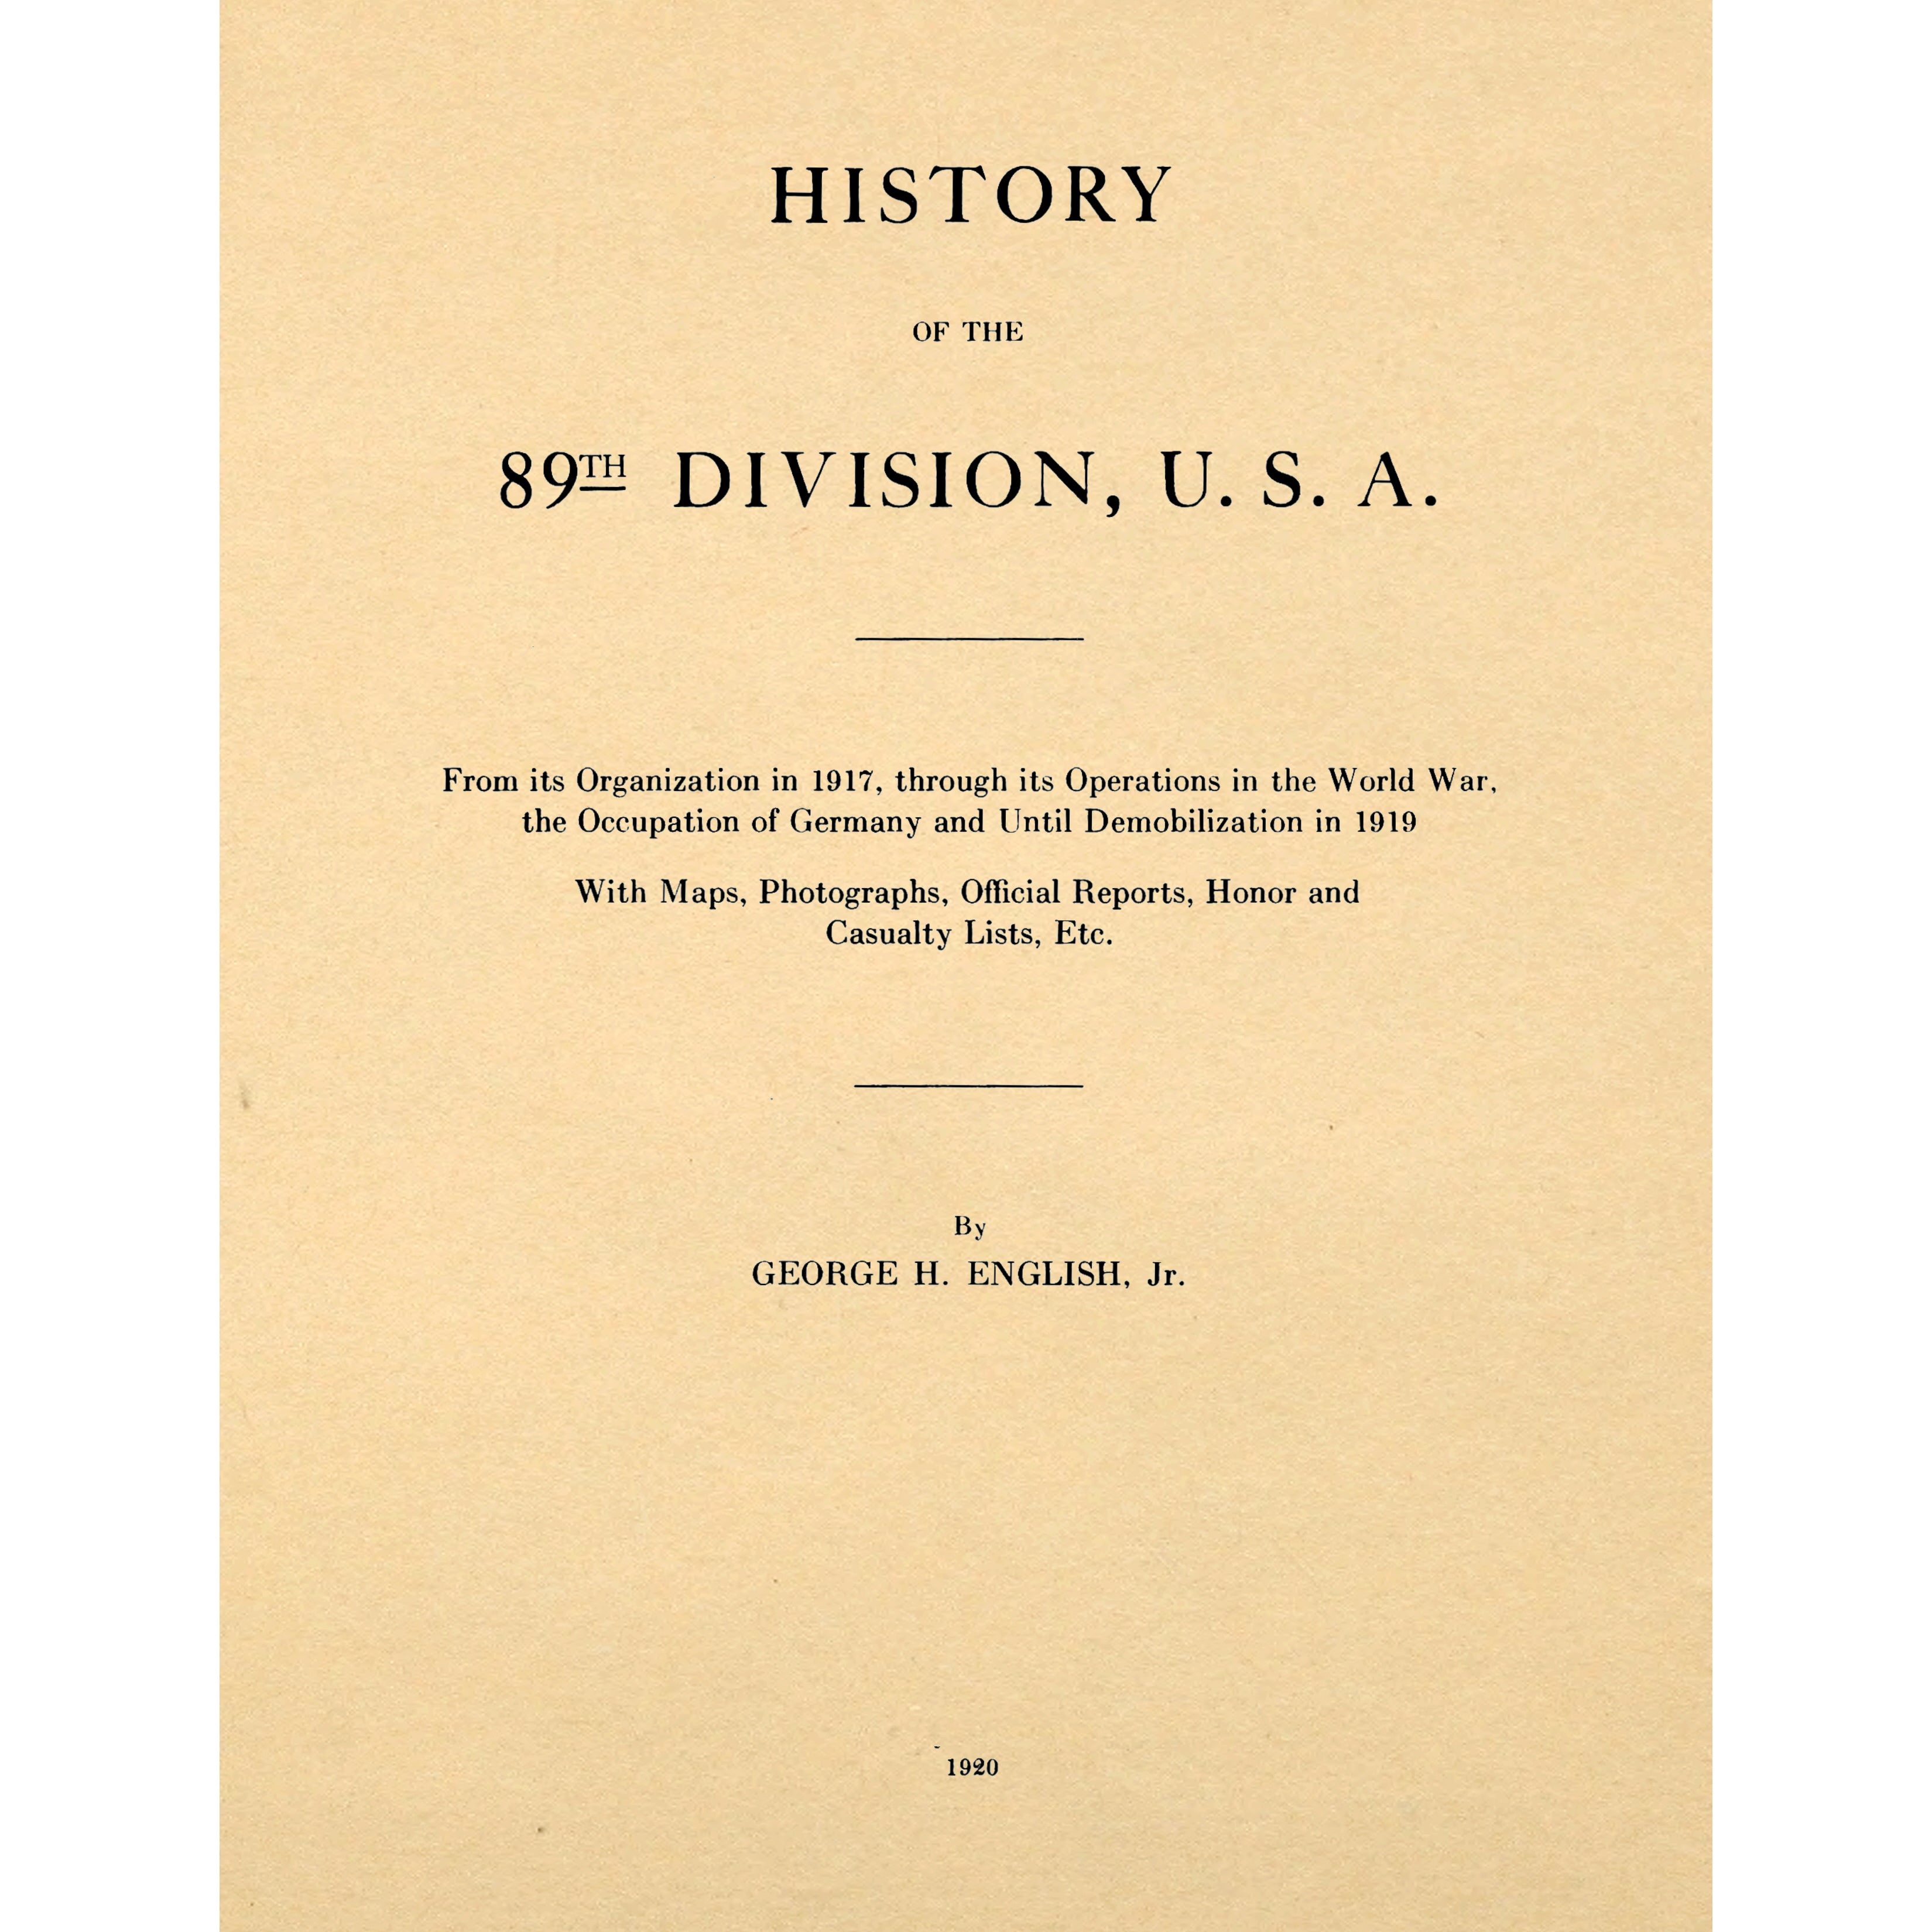 History of the 89th Division, U.S.A.; From its Organization in 1917, through its Operations in the World War